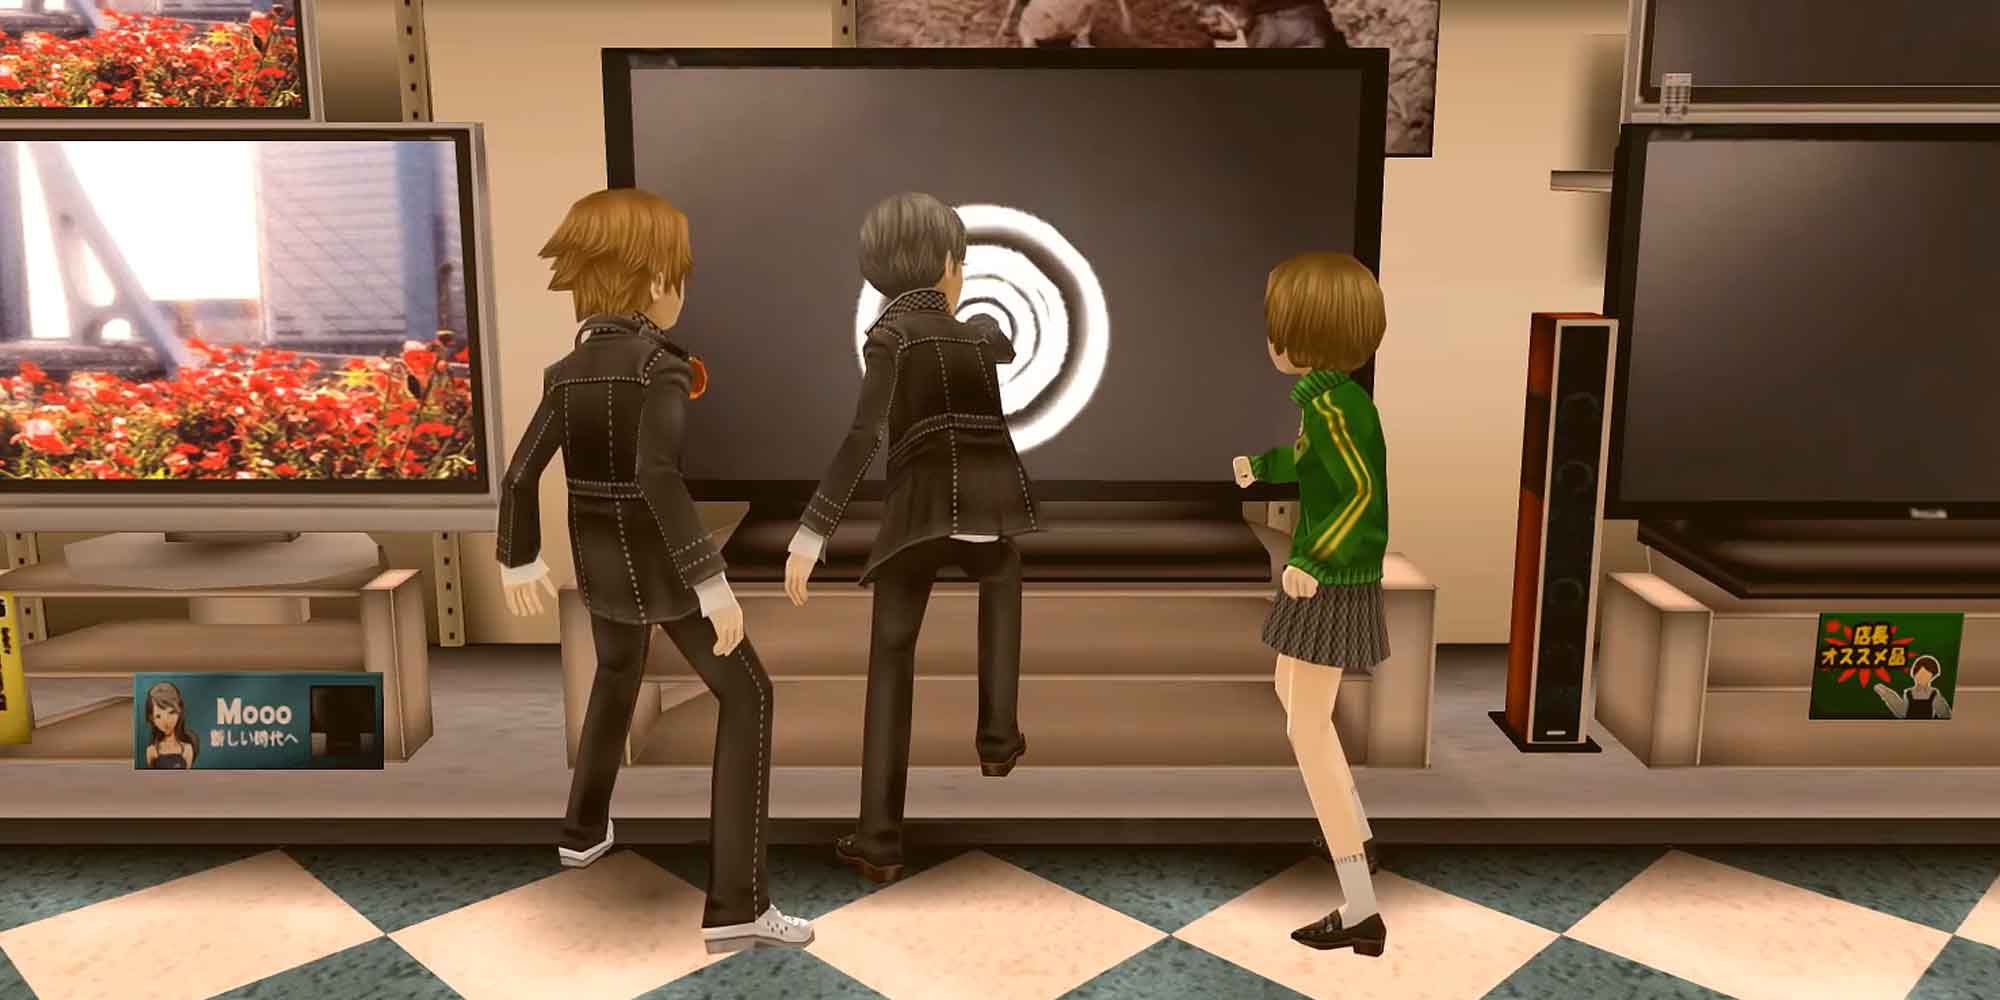 Entering the TV world in Persona 4